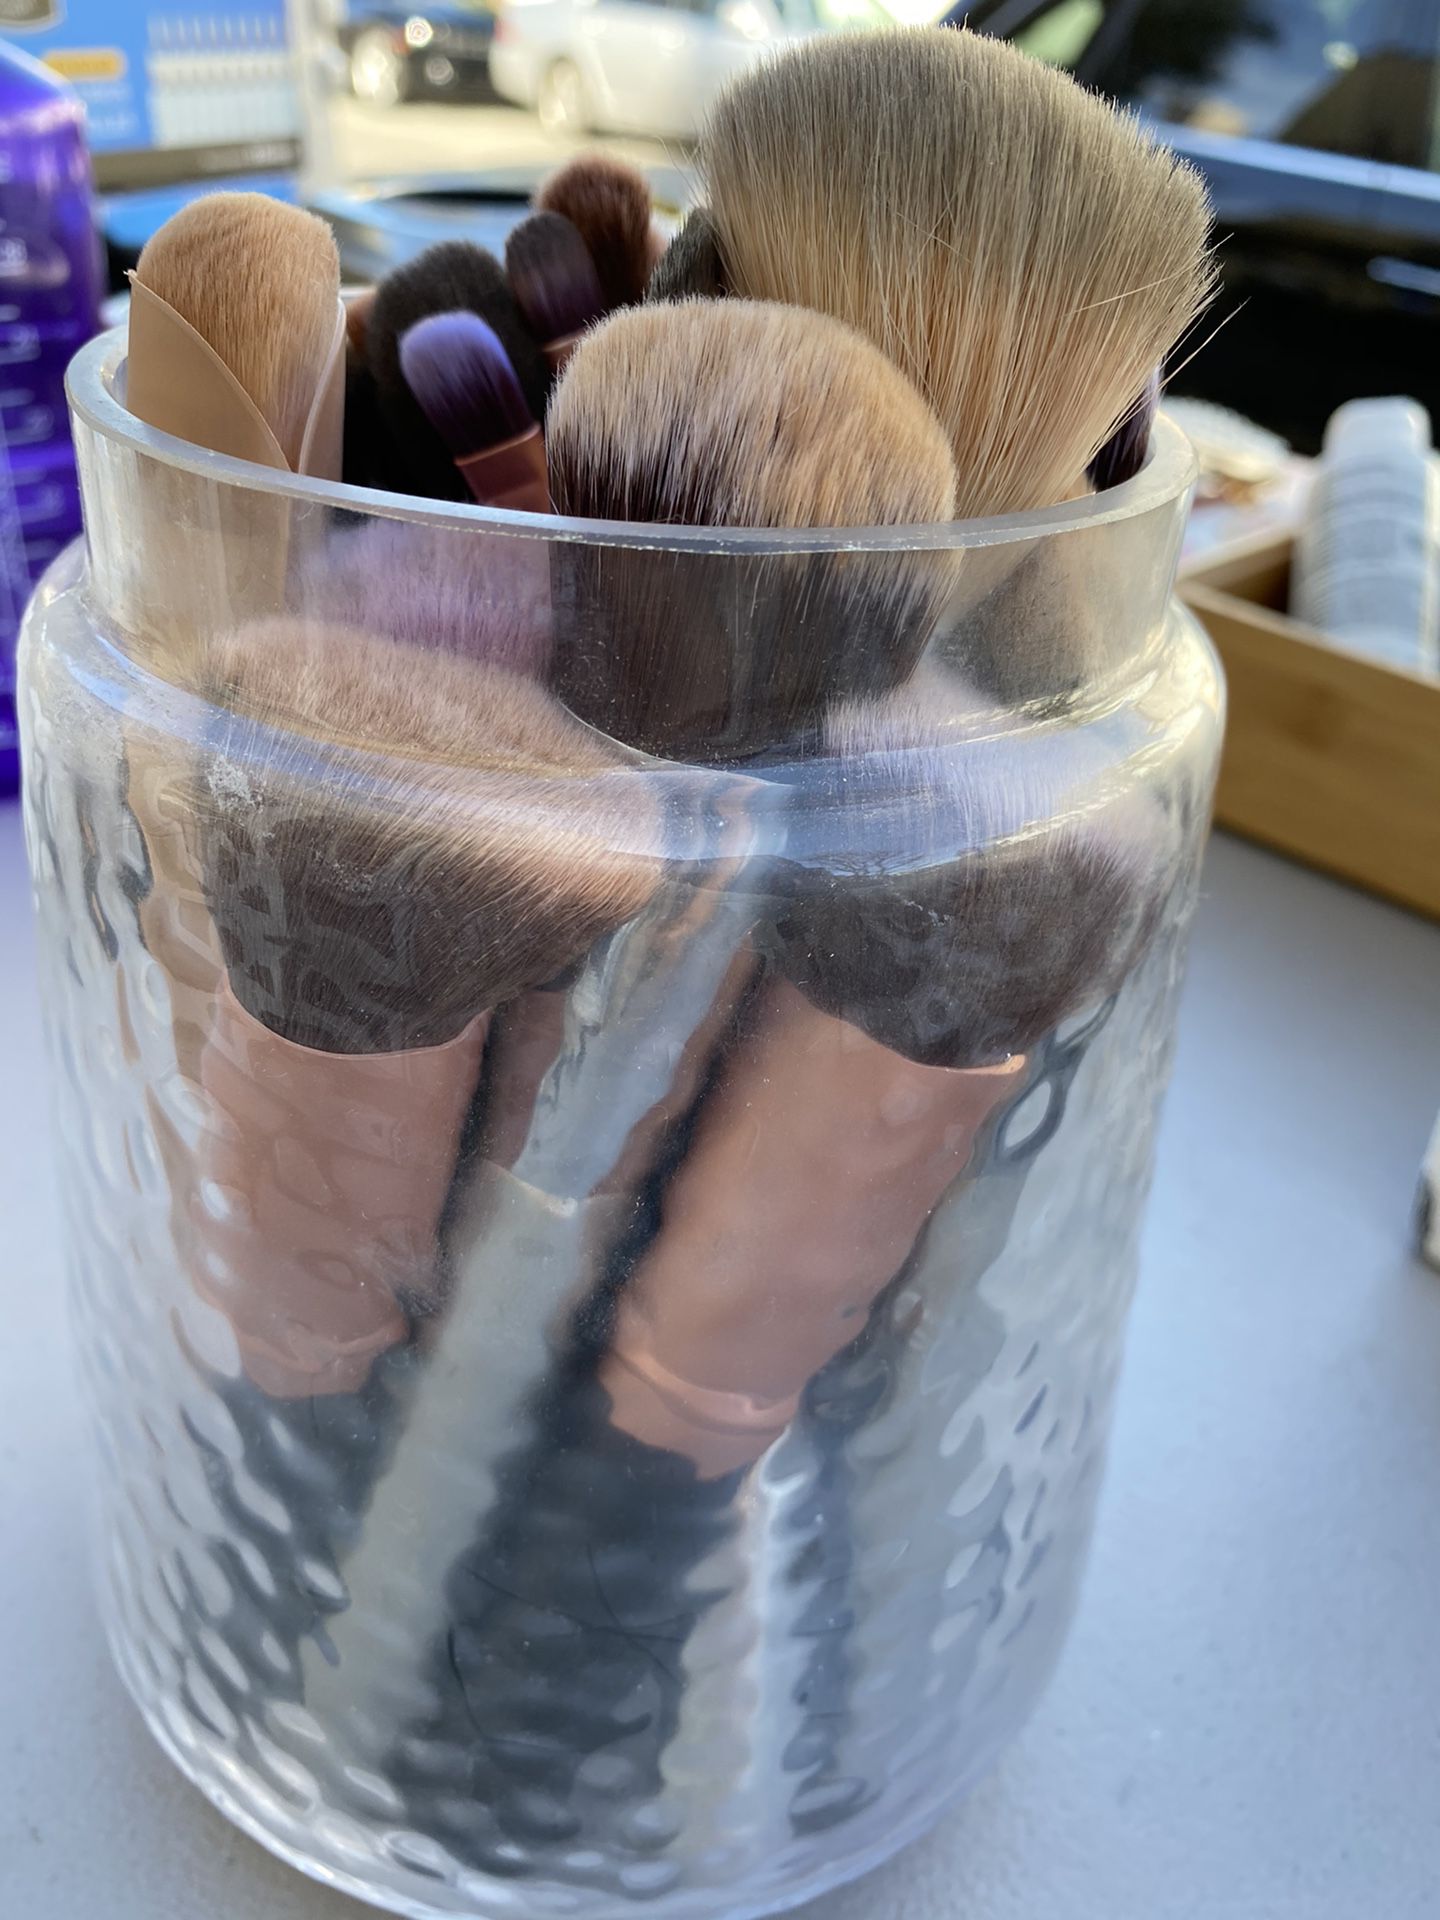 Makeup brushes (15) - Variety - bundle deal! Amazing offer